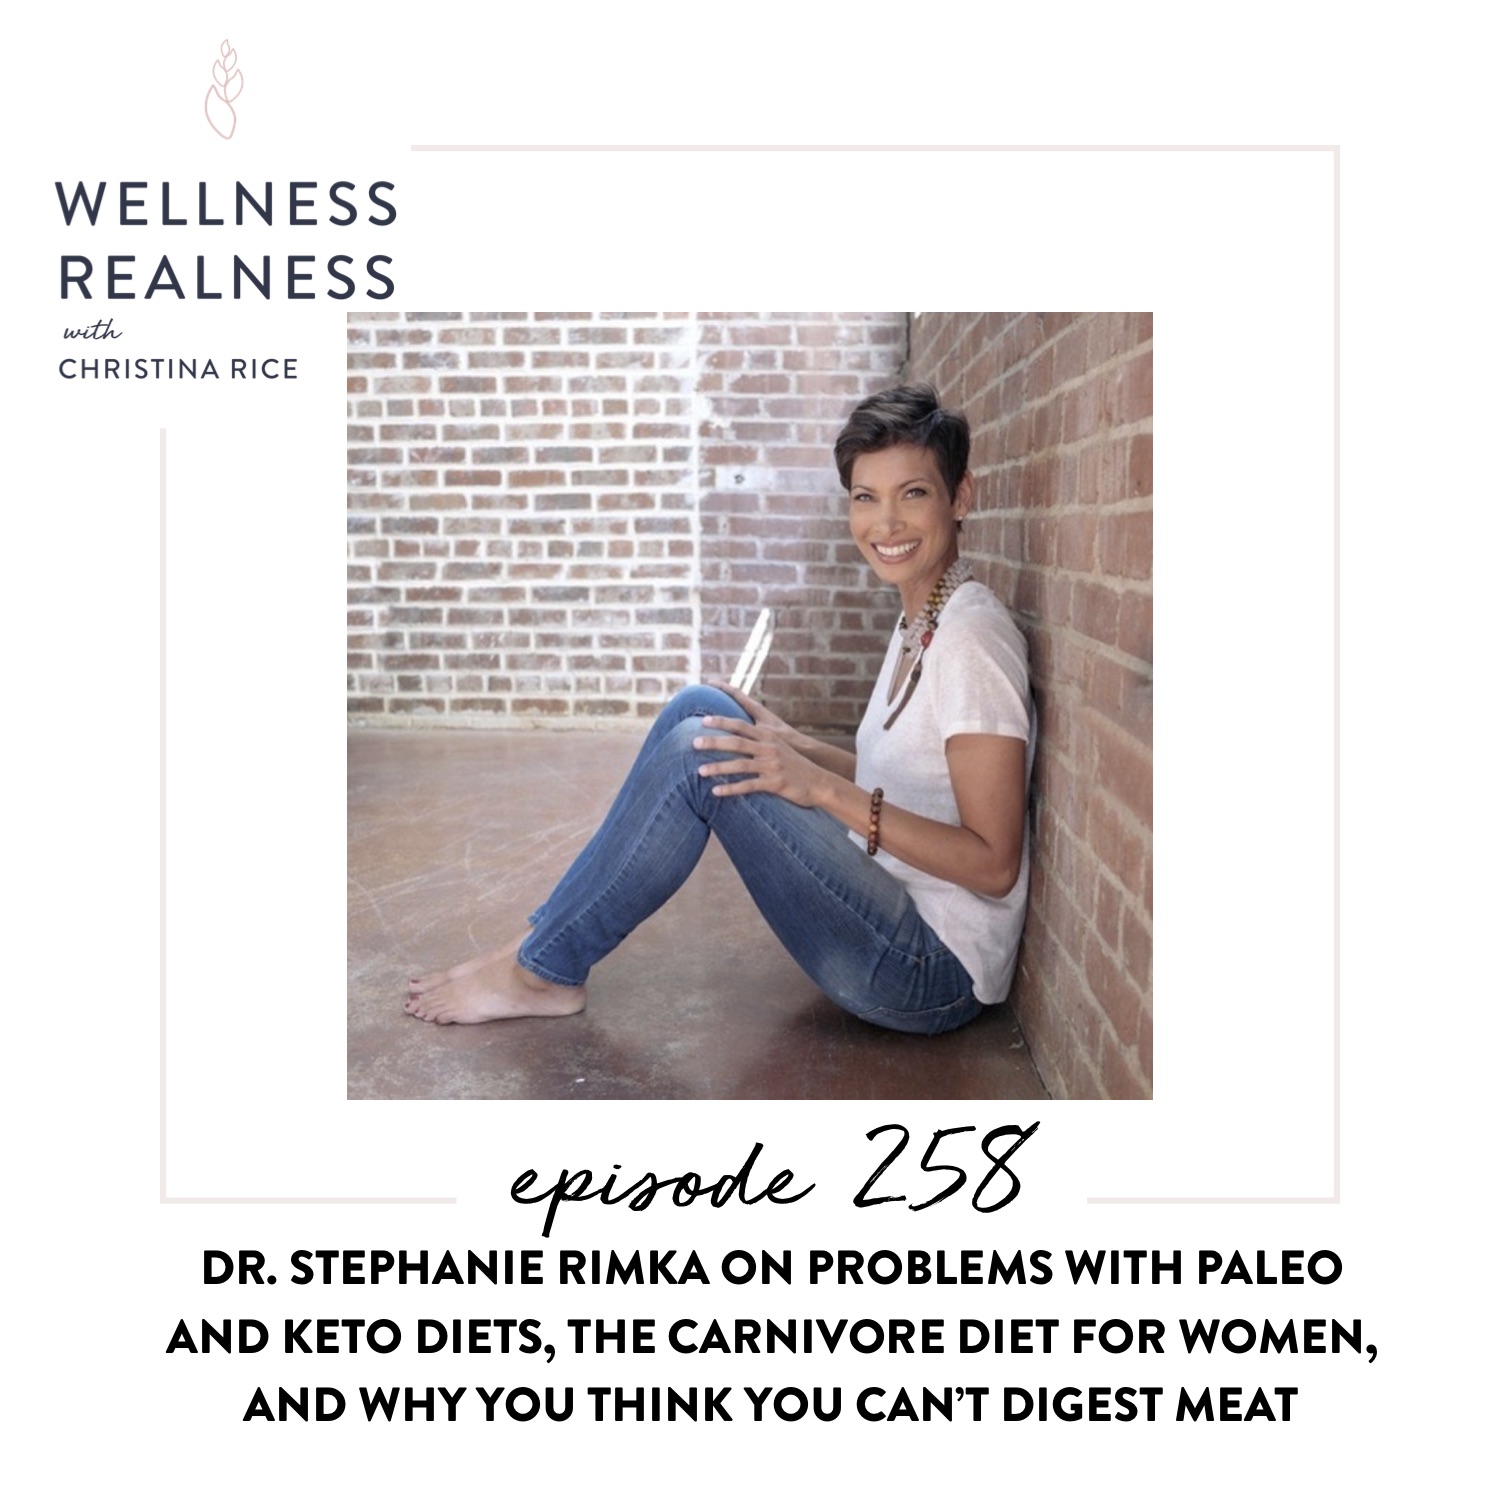 258: Dr. Stephanie Rimka on Problems with Paleo and Keto Diets, the Carnivore Diet for Women, and Why You Think You Can’t Digest Meat